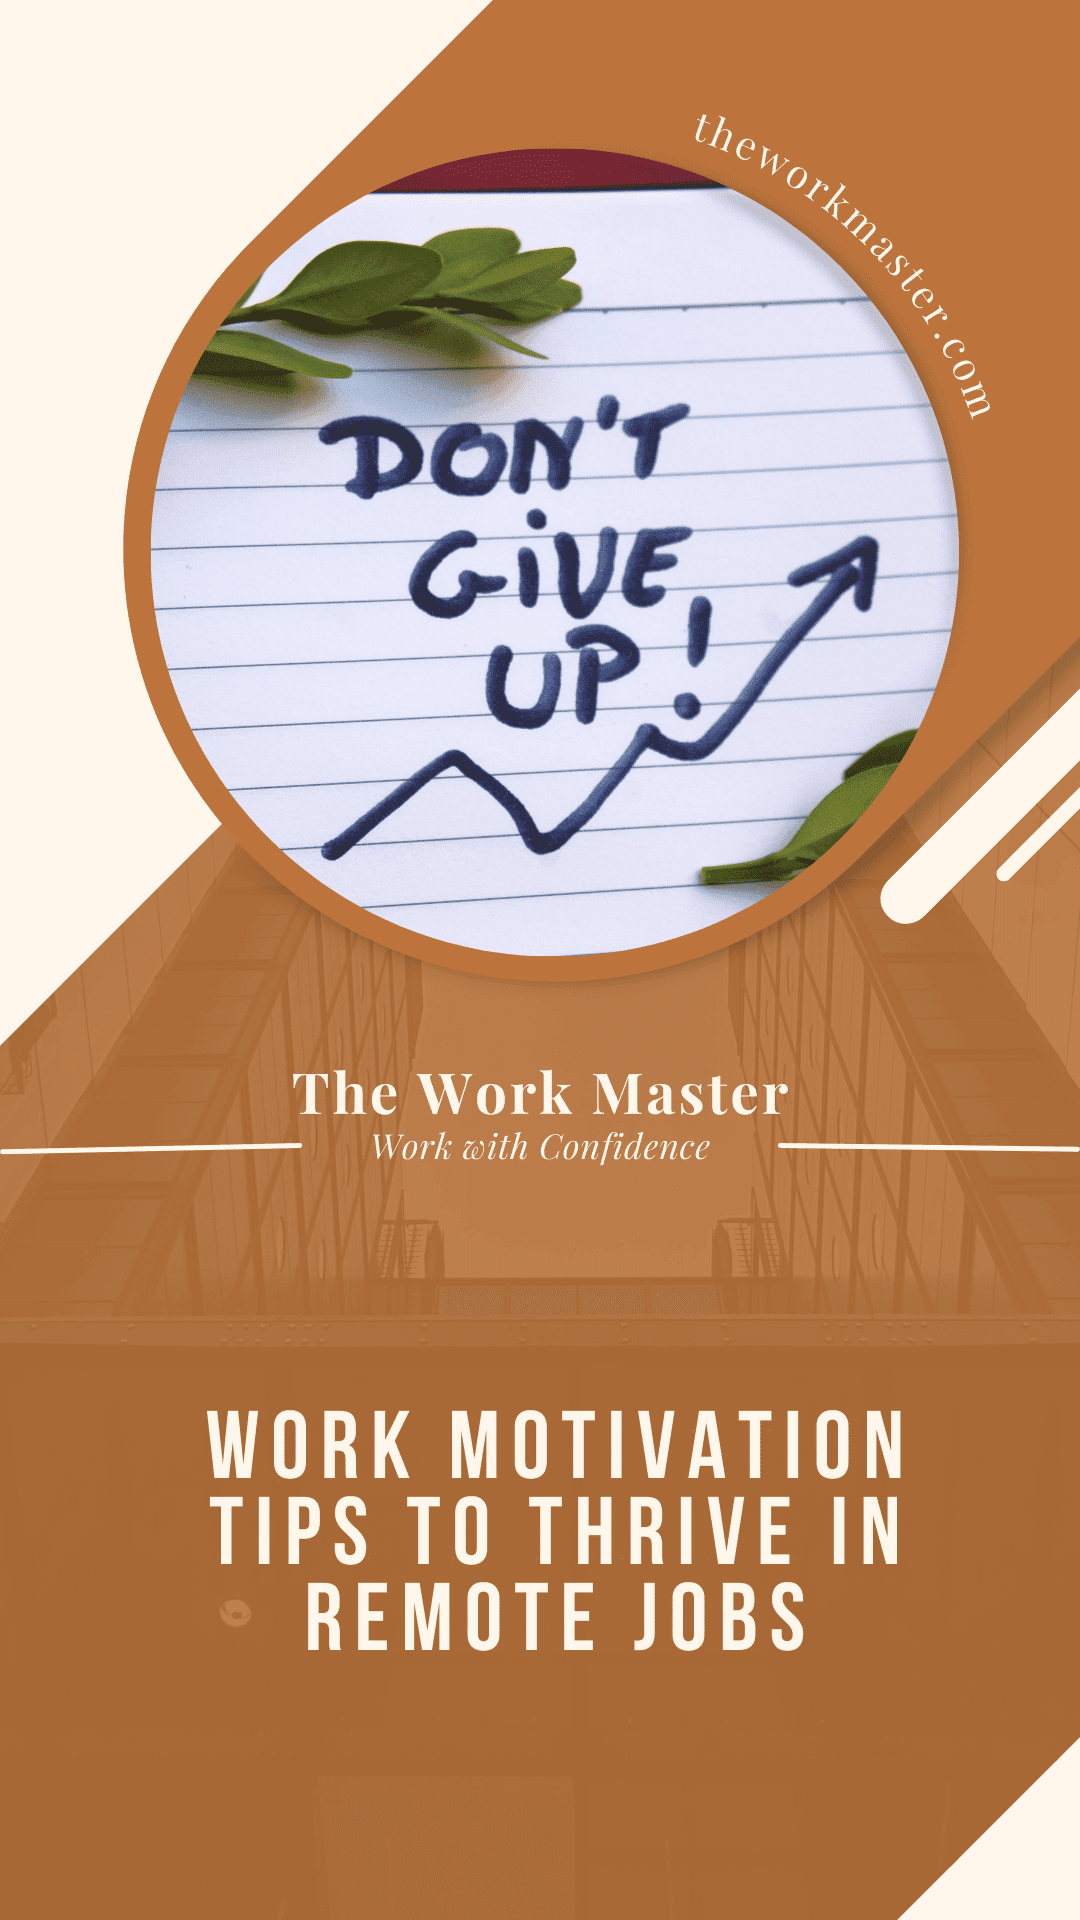 a pin about work motivation tips to thrive in remote jobs